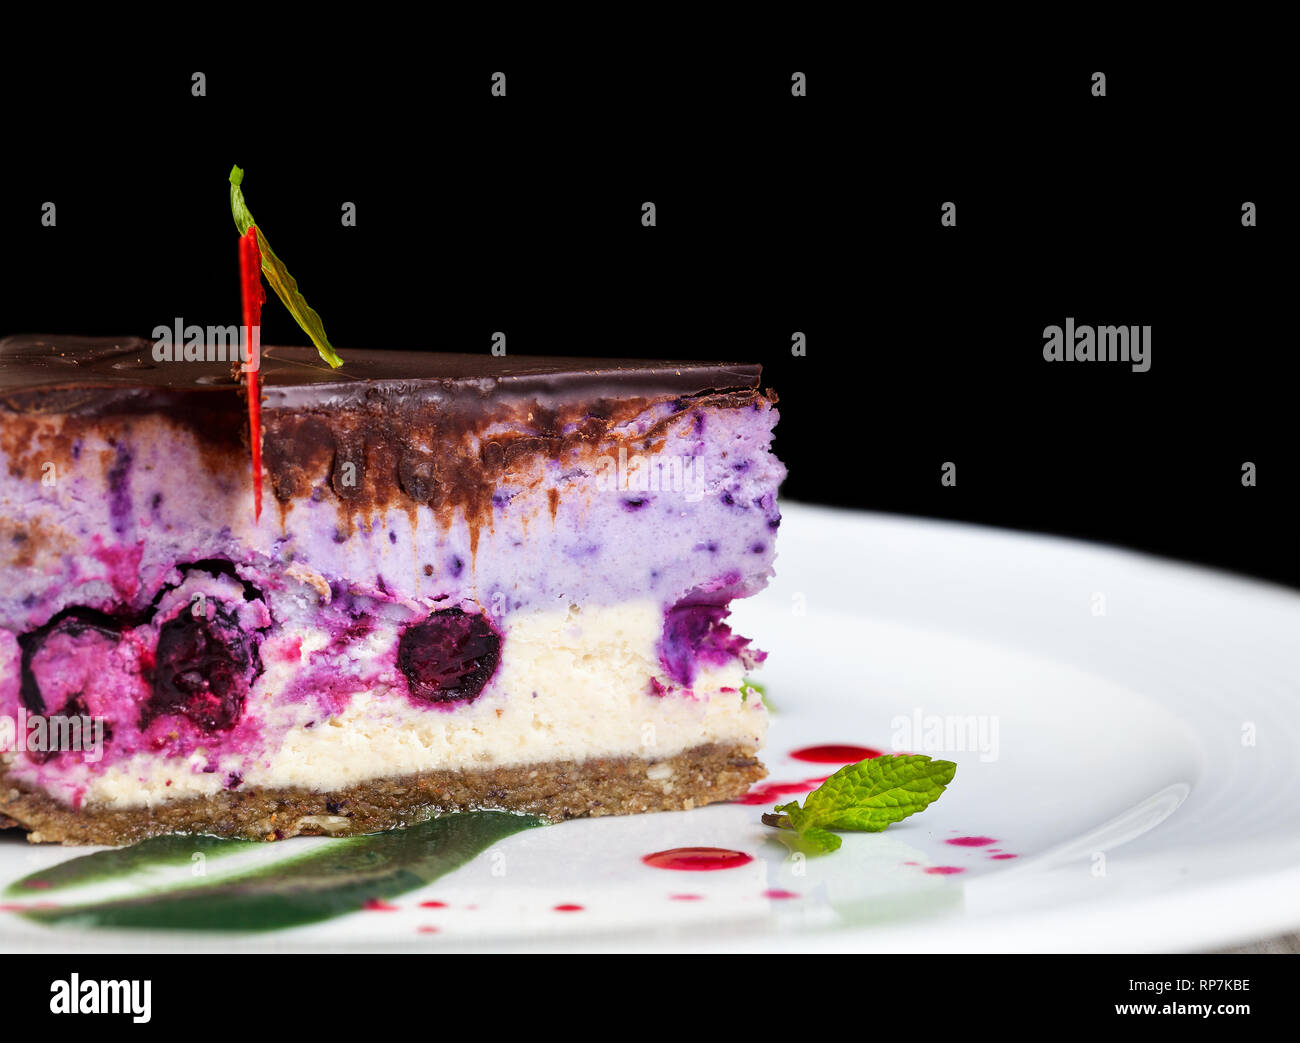 Raw vegan cake with berries decorated by chef on white plate closeup in restaurant at black background Stock Photo